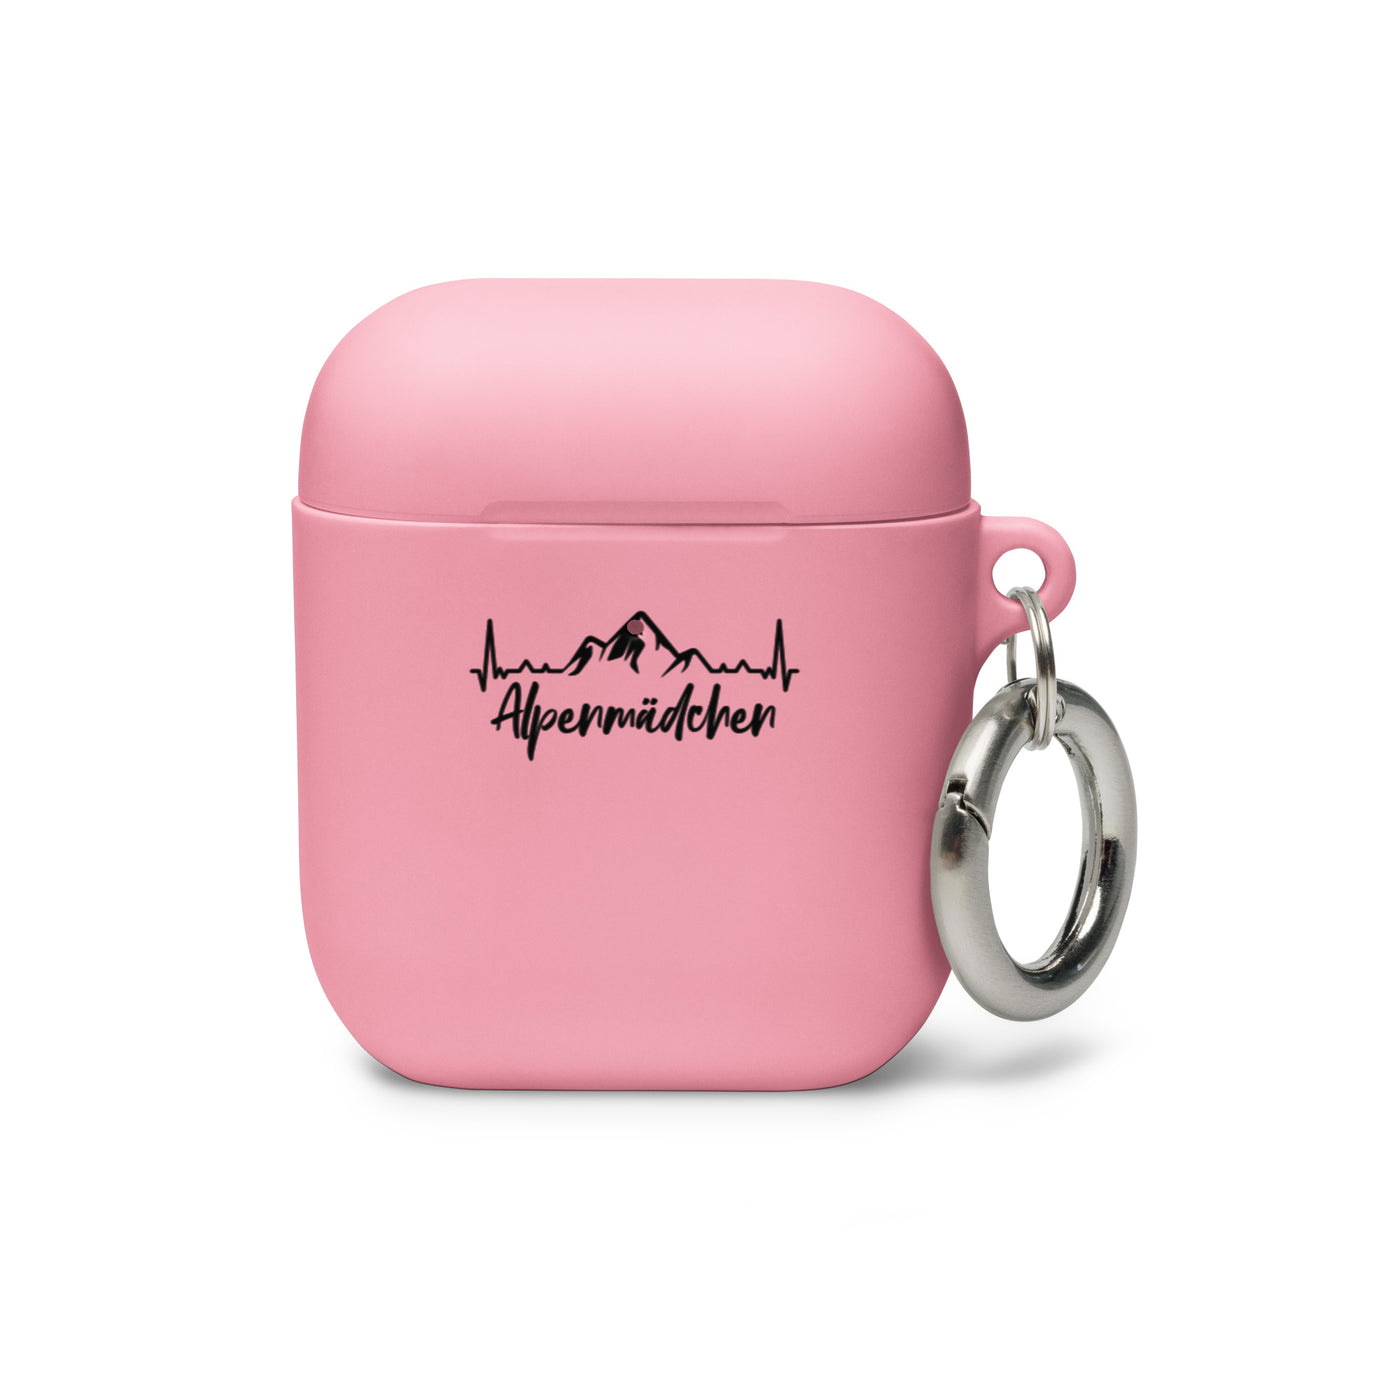 Alpenmadchen 1 - AirPods Case berge Pink AirPods